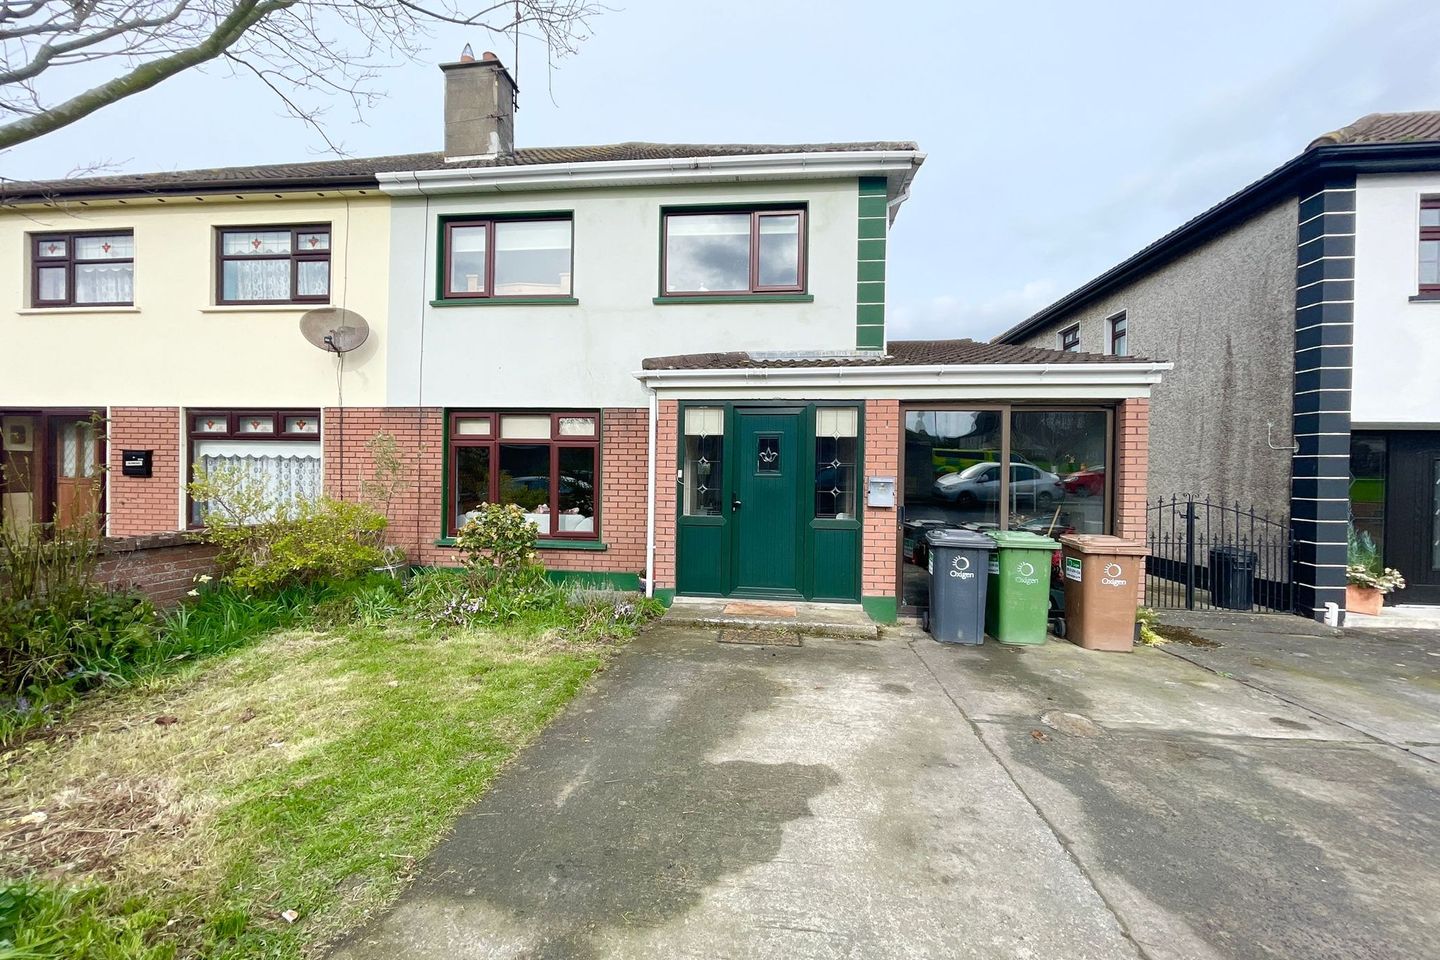 52 Rosevale, Drogheda, Co. Louth